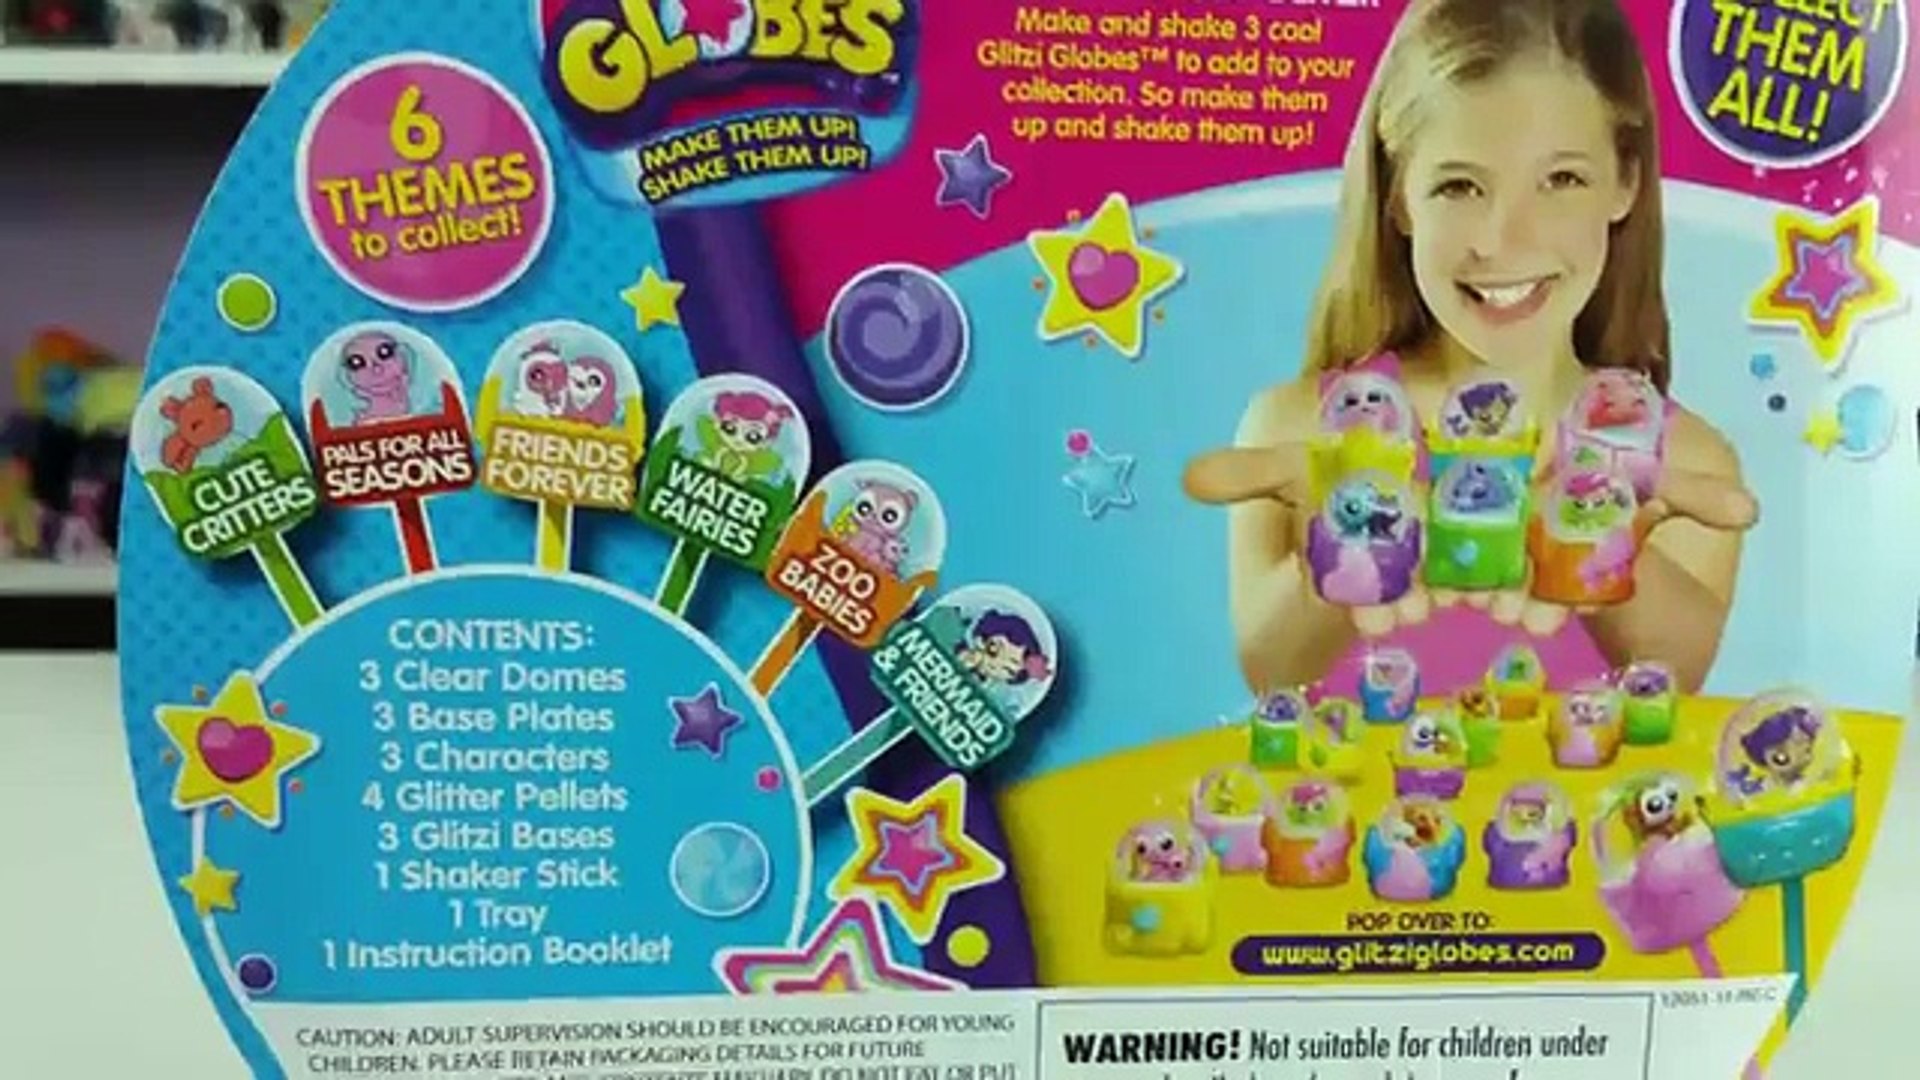 Special Glitzi Globes Water Fairies 3 Pack Opening! - Dailymotion Video